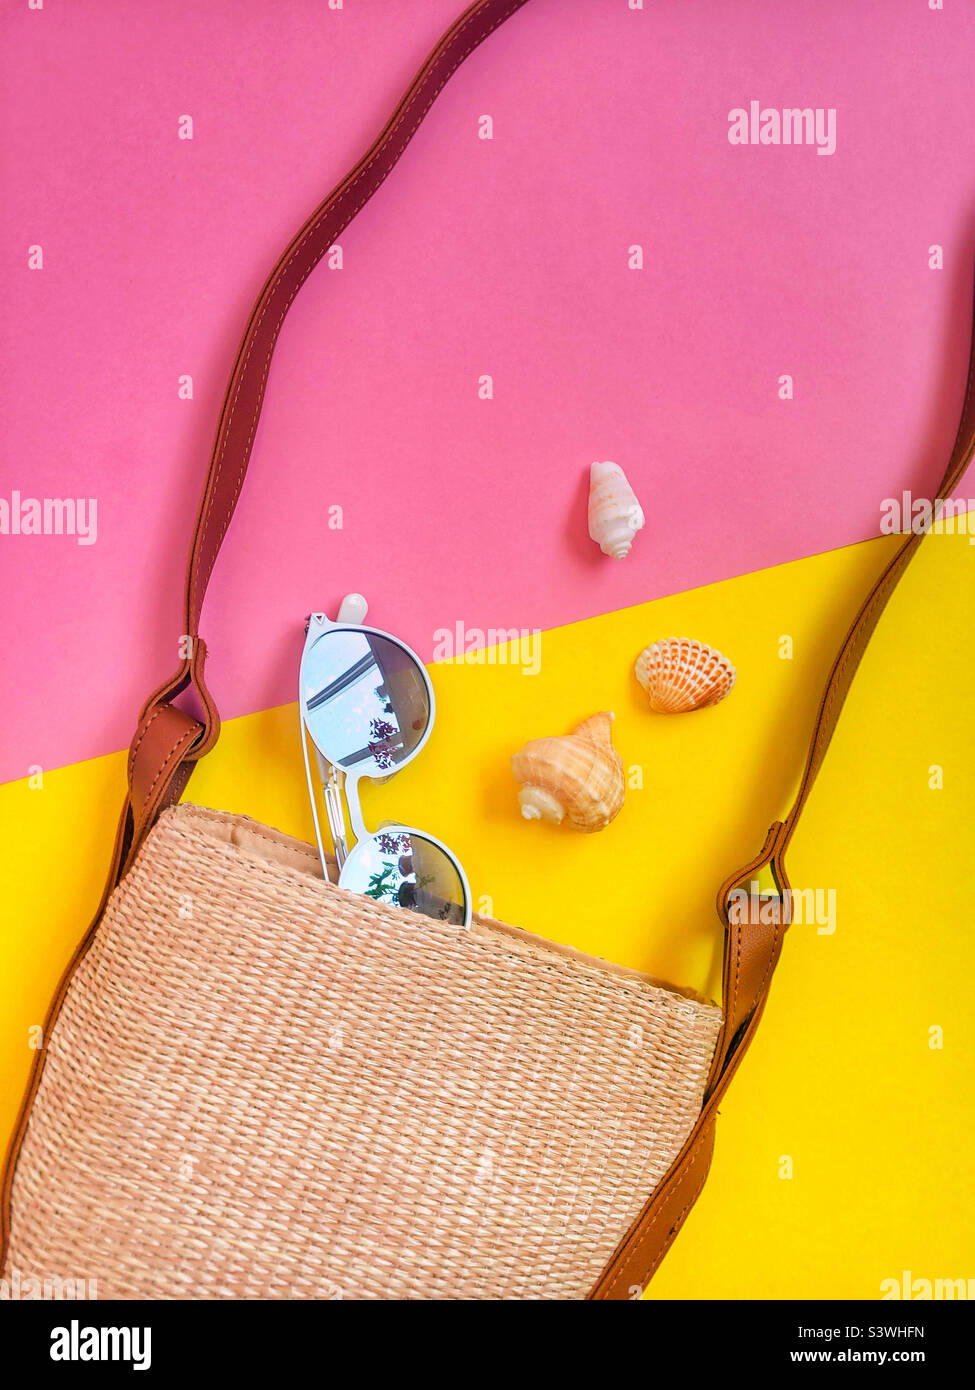 Summer bag with sunglasses and seashells, vacation time. Flatlay on colorful background. Stock Photo